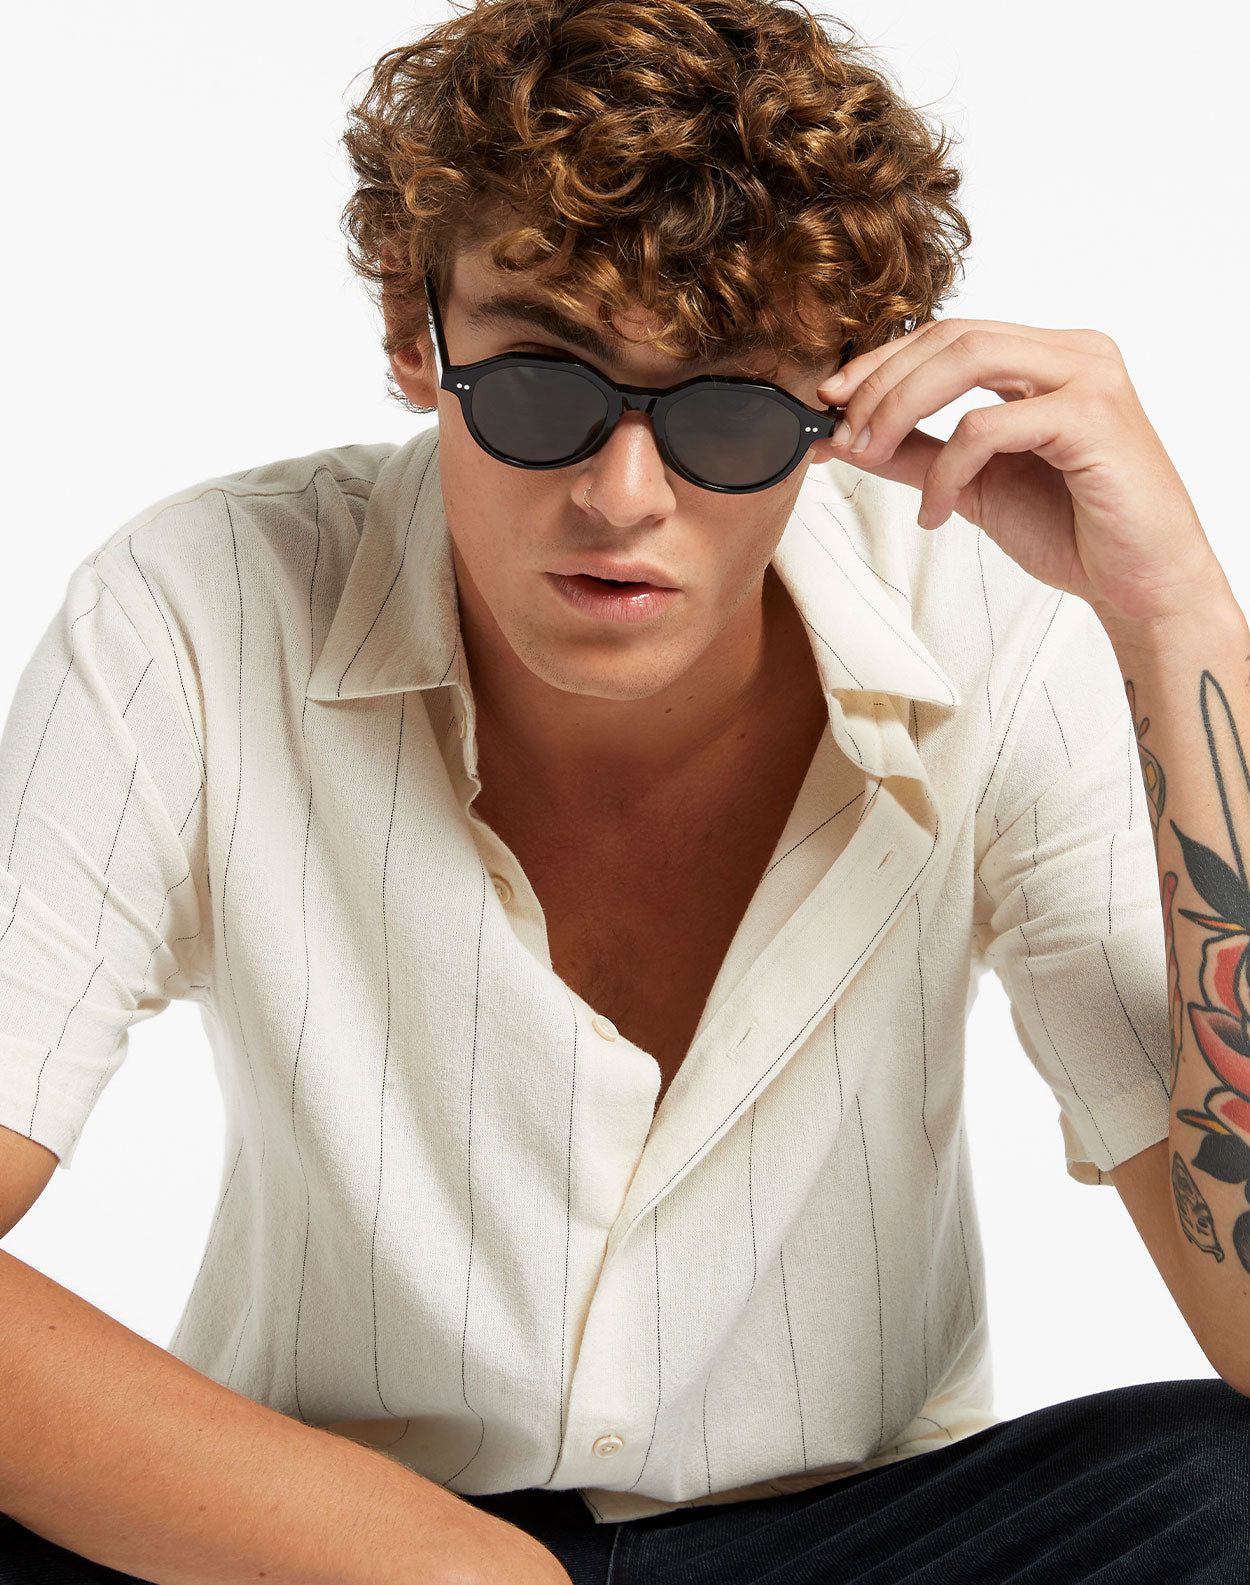 Men's Sunglasses  Shop Online at Status Anxiety®